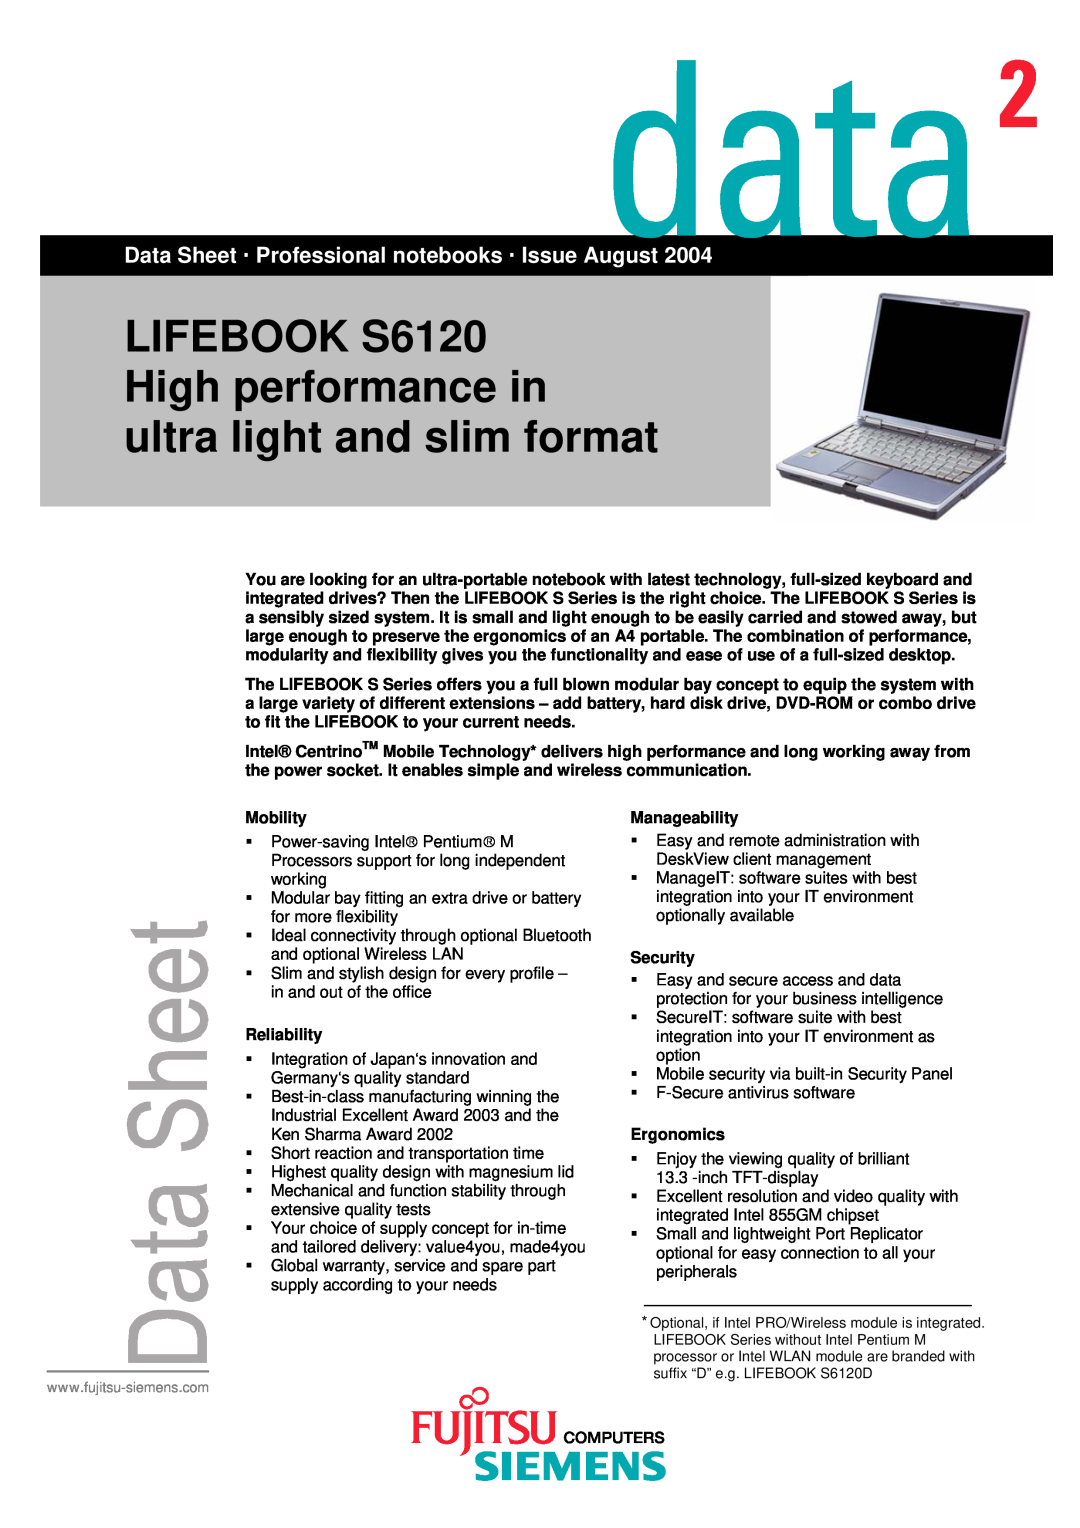 Fujitsu warranty LIFEBOOK S6120 High performance in ultra light and slim format 